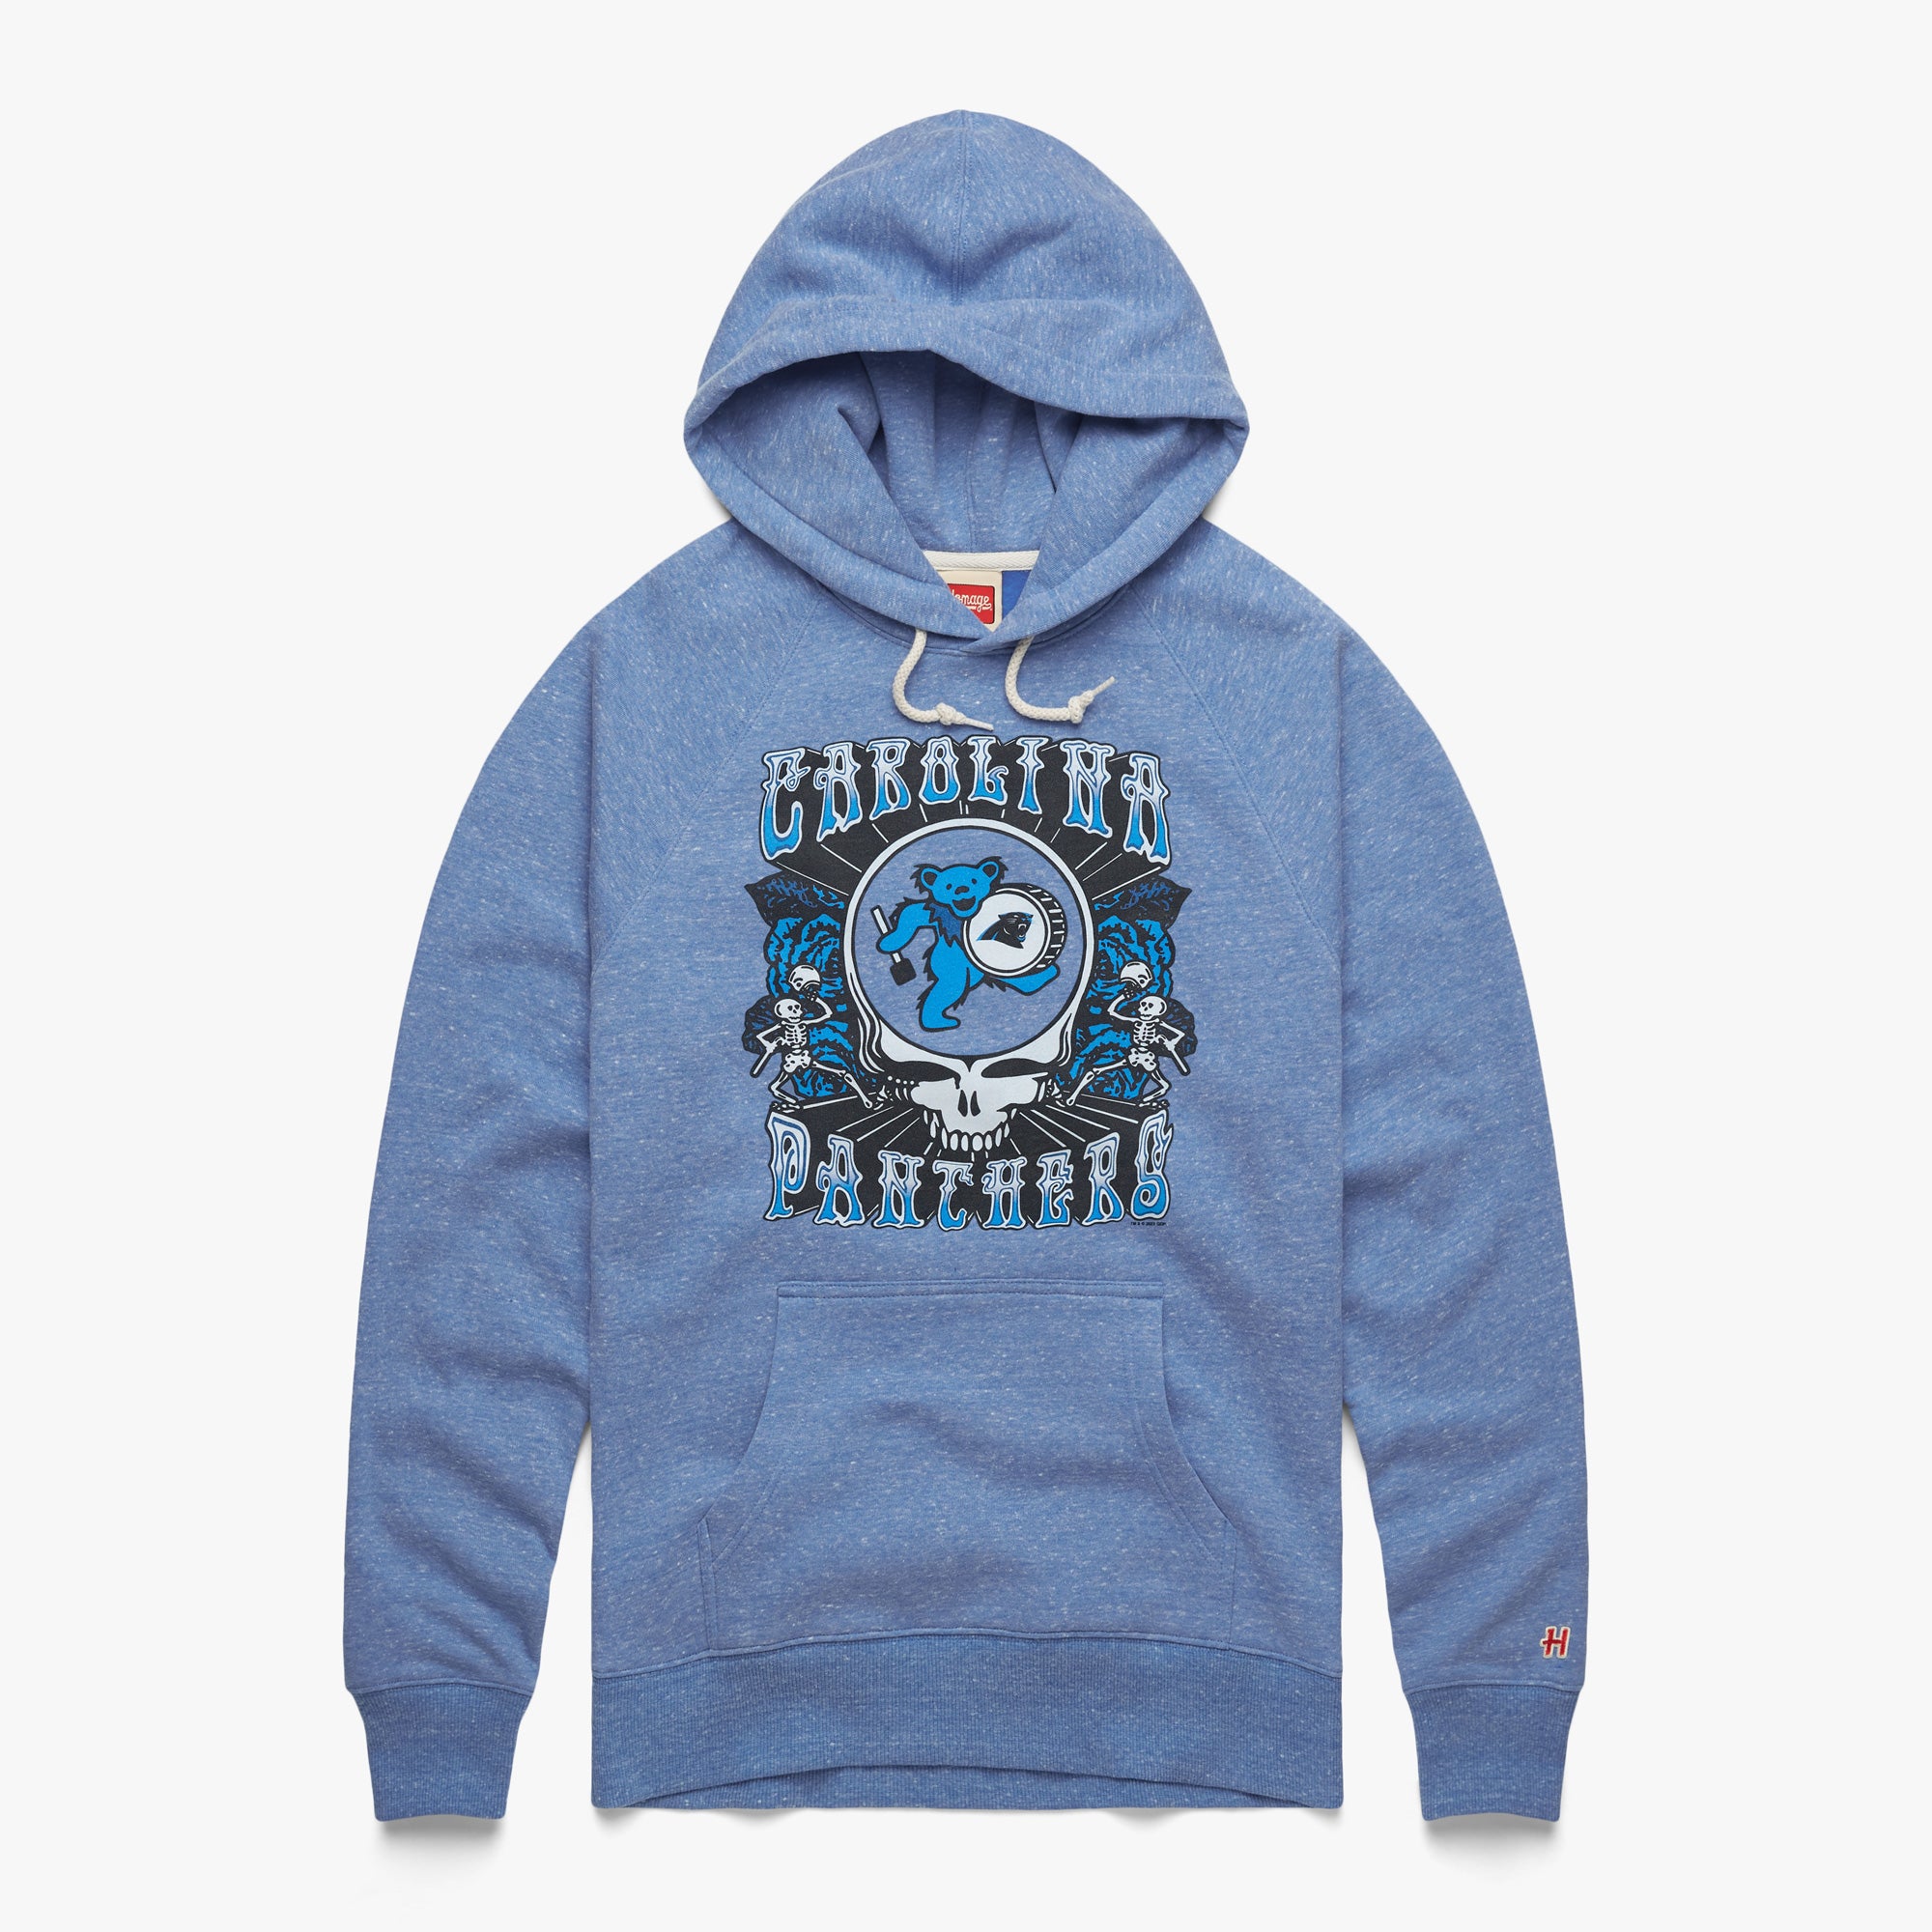 NFL x Grateful Dead x Carolina Panthers Hoodie from Homage. | Officially Licensed Vintage NFL Apparel from Homage Pro Shop.